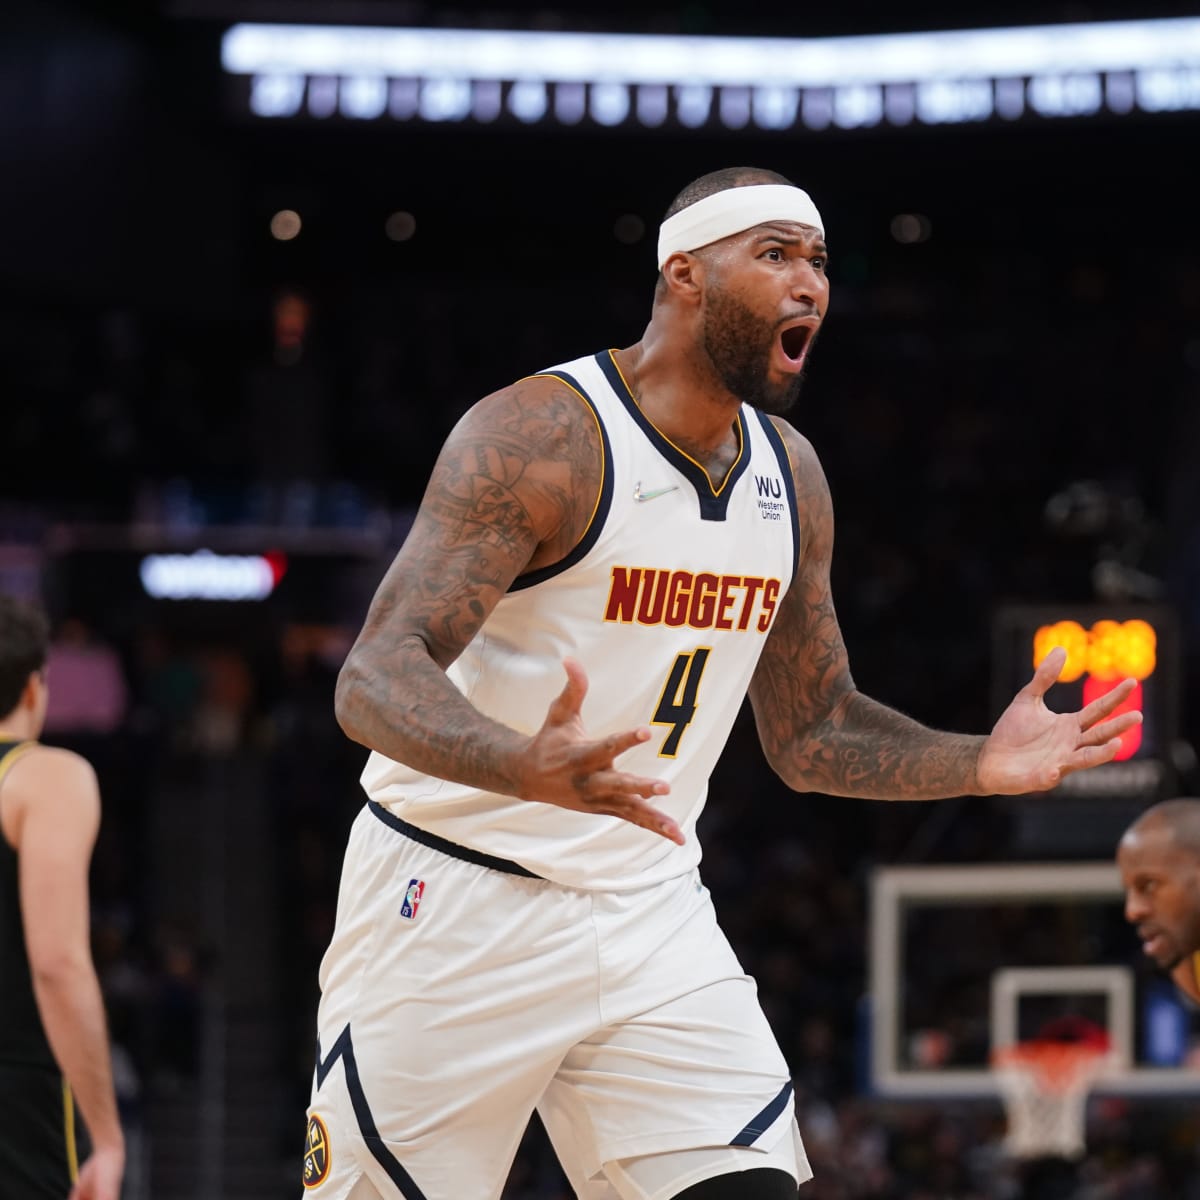 Report: DeMarcus Cousins to play for Puerto Rico's Guaynabo Mets in bid for  NBA return [Video]